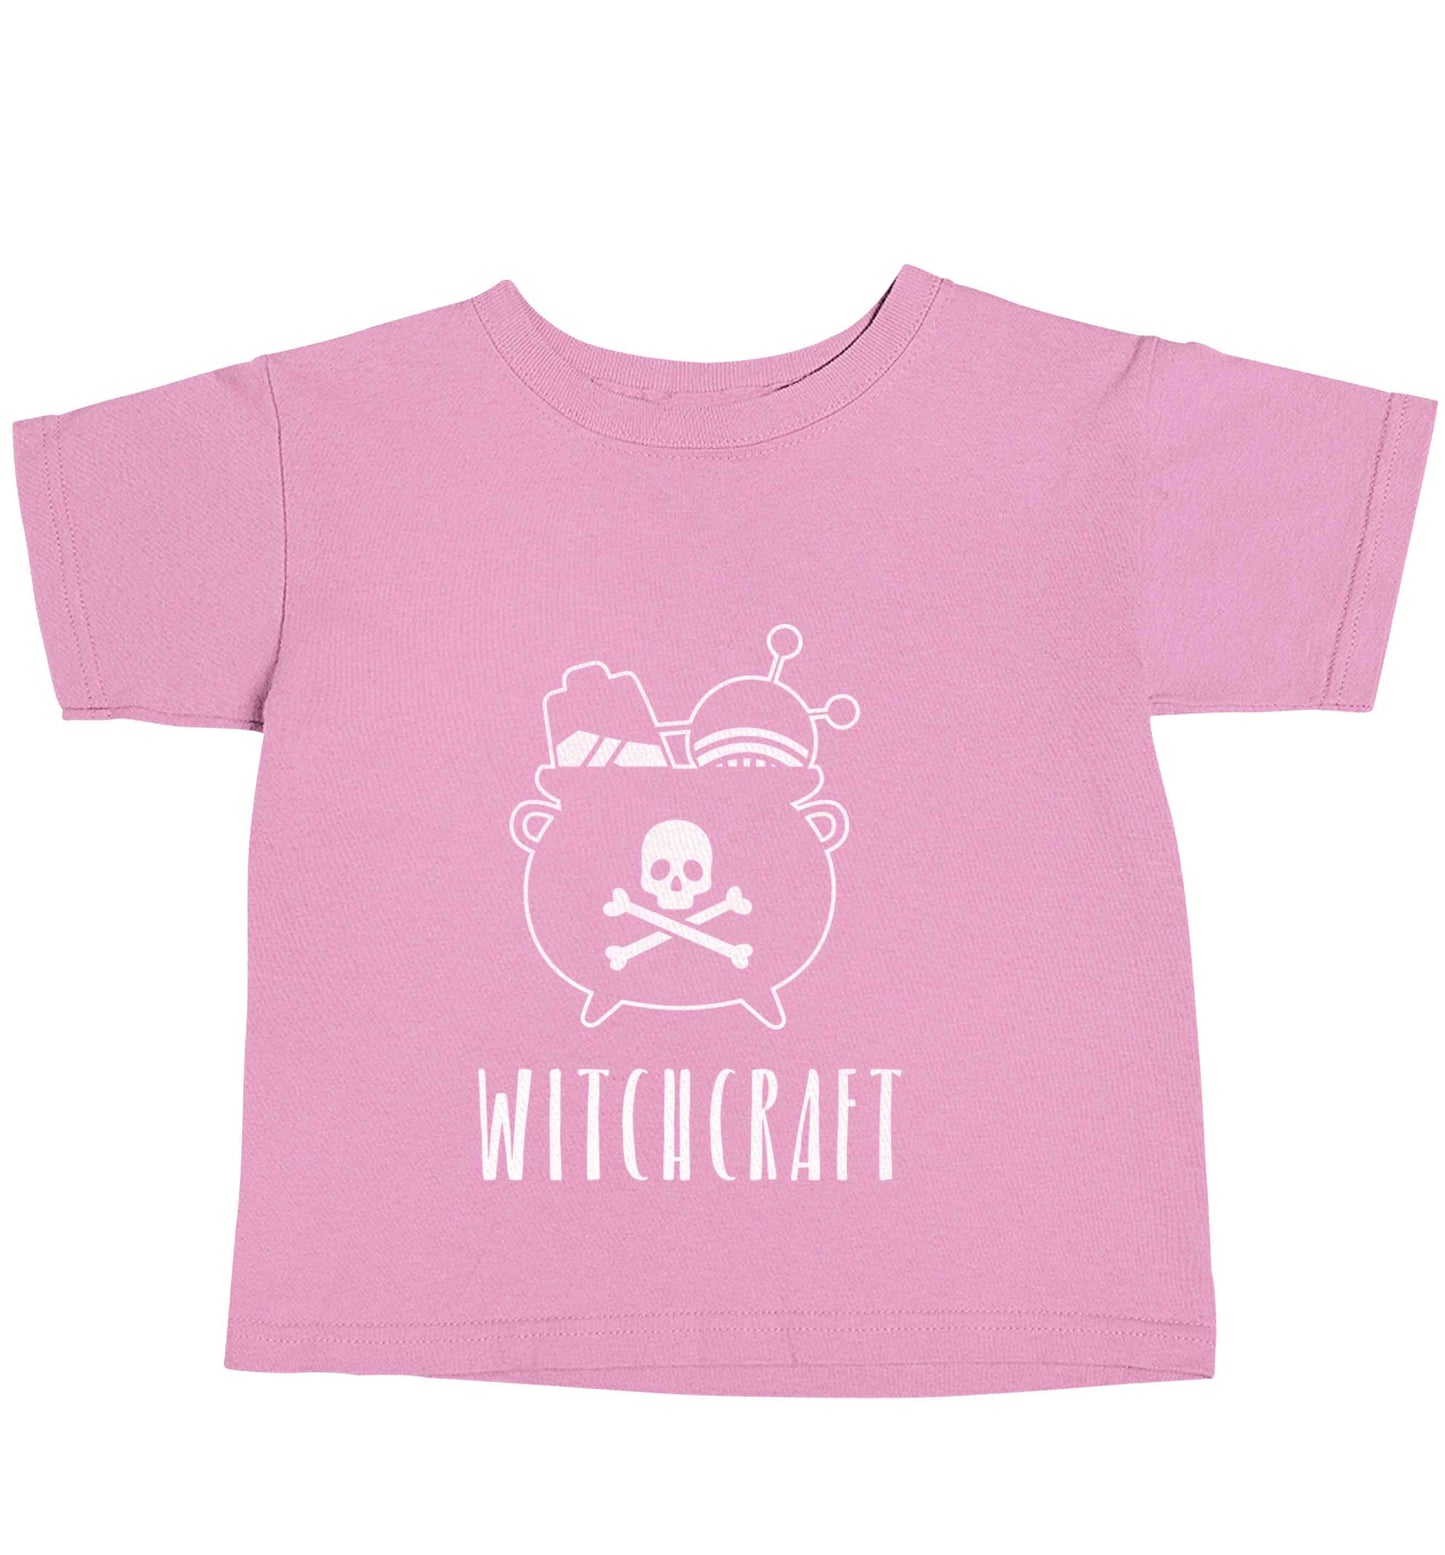 Witchcraft light pink baby toddler Tshirt 2 Years